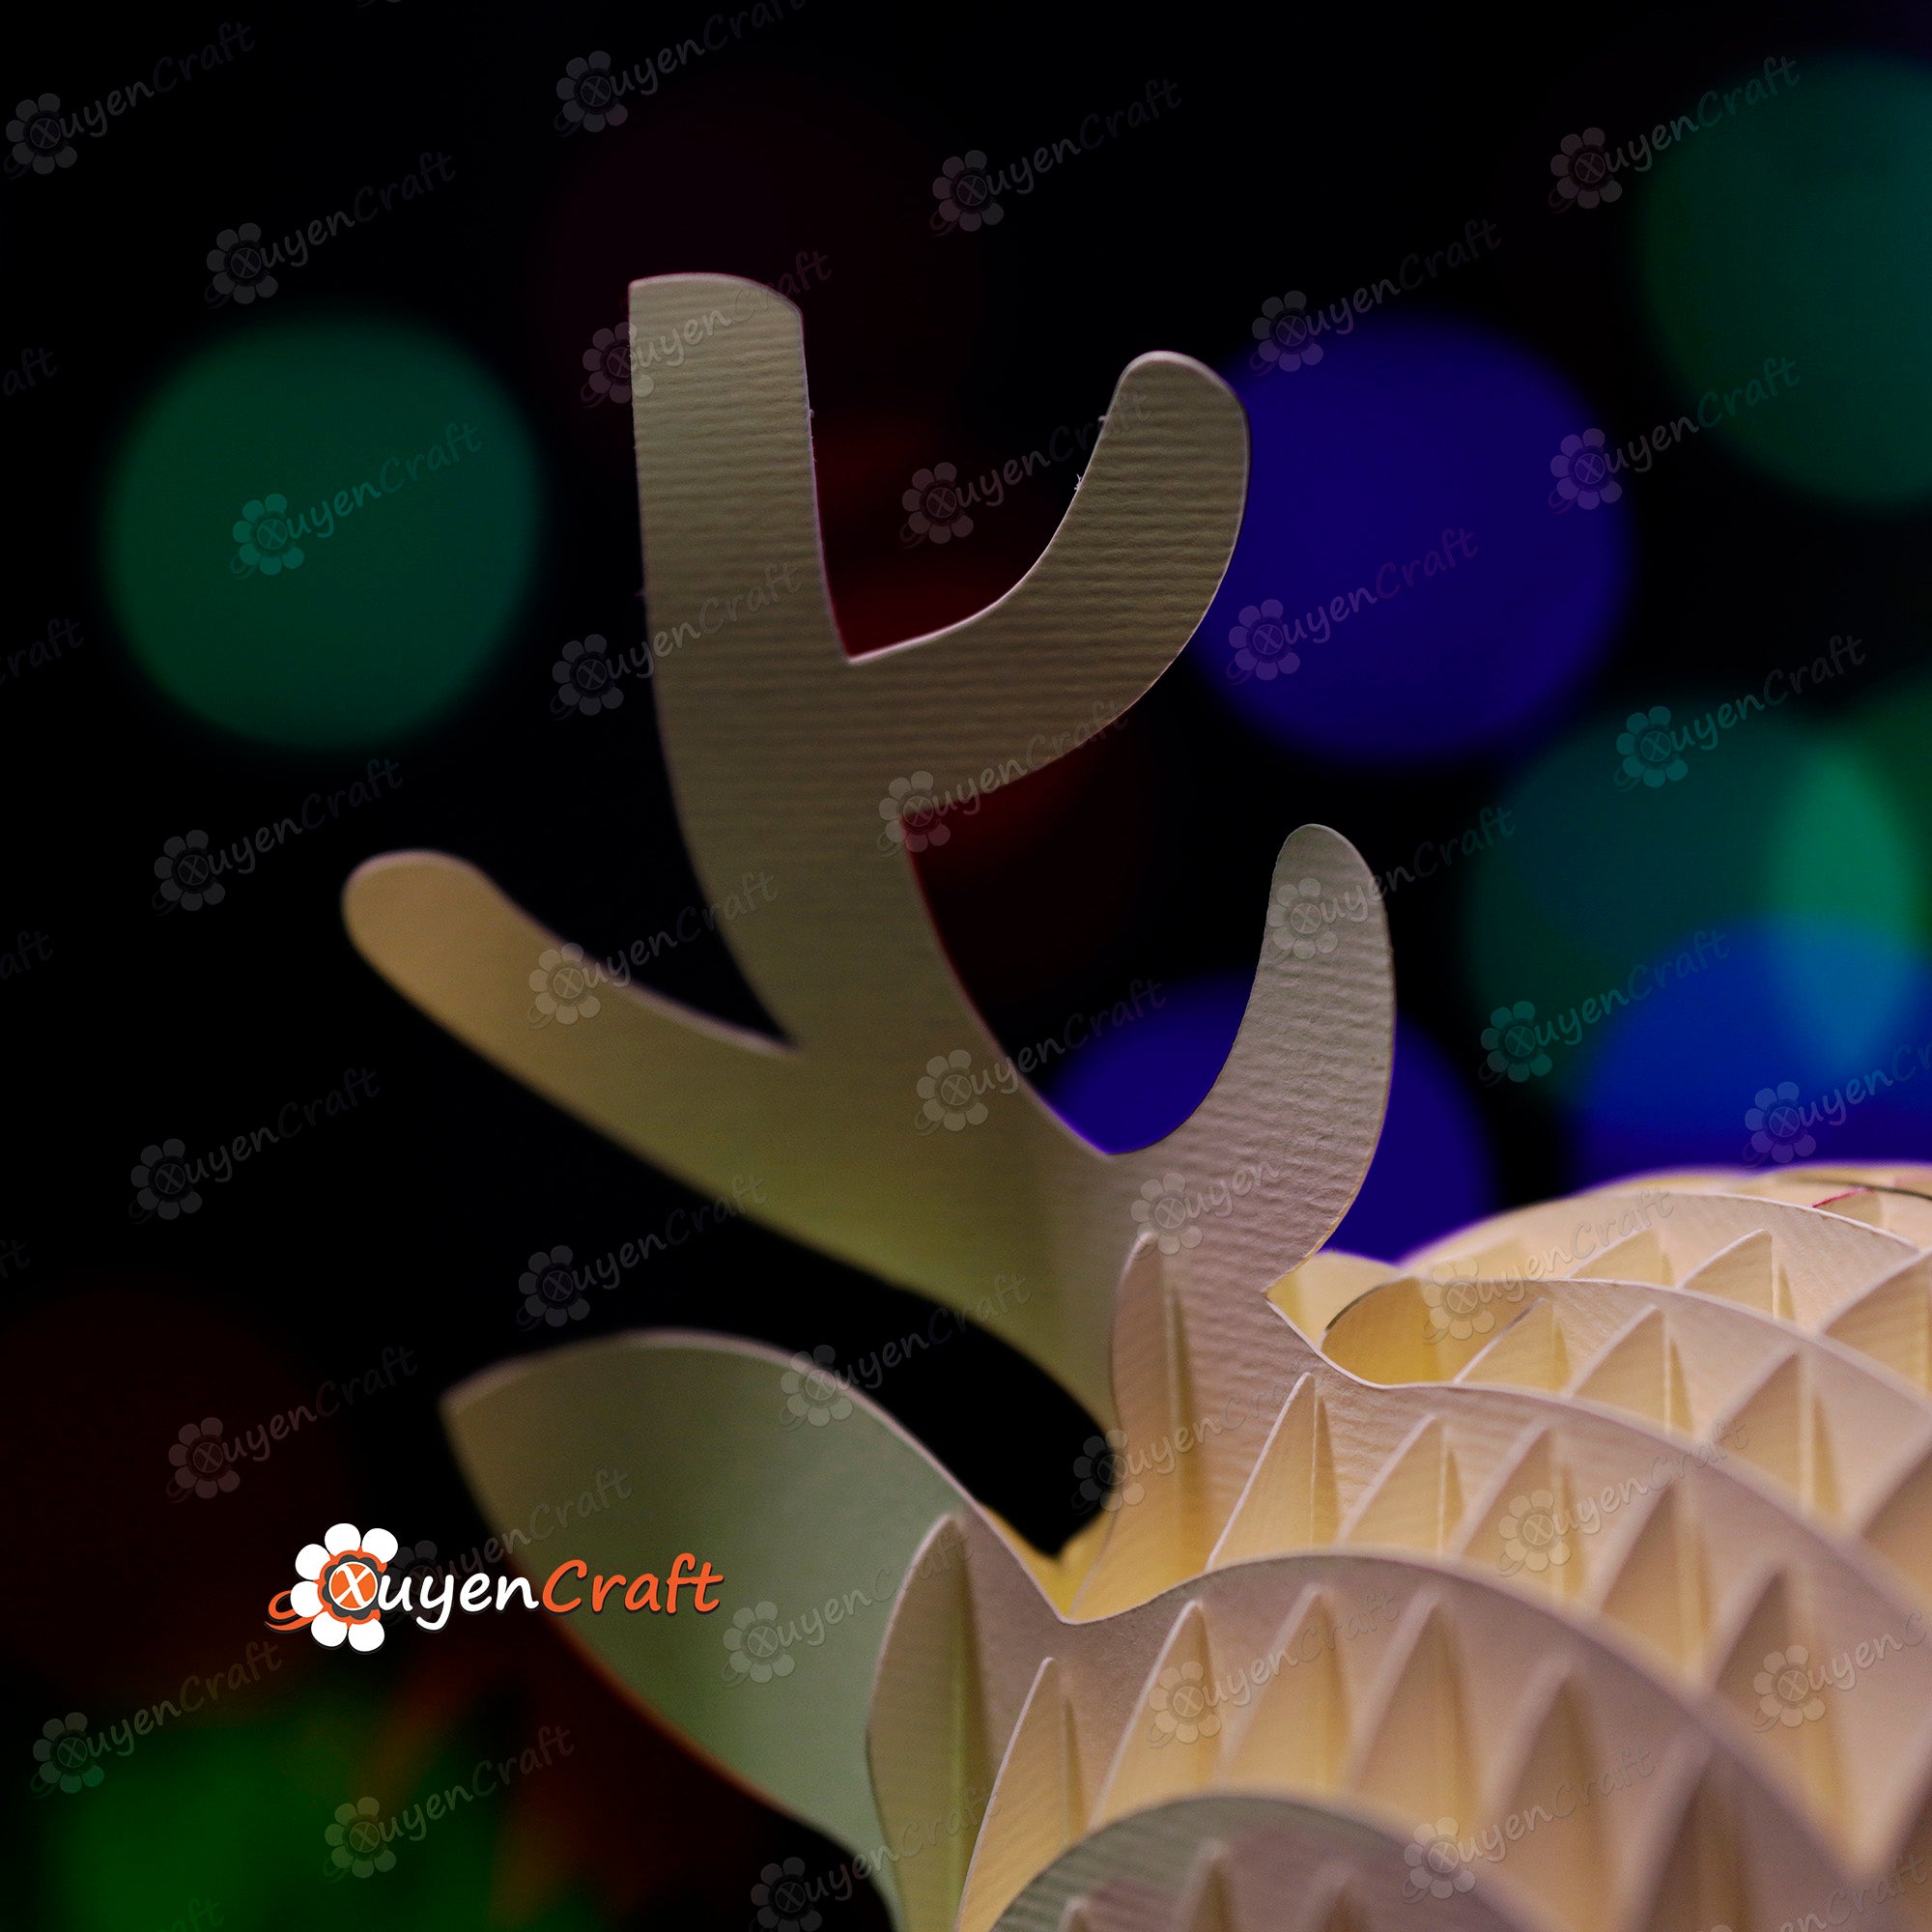 Merry Christmas Reindeer Pop Up SVG Template for Cricut Projects - 3D Reindeer Slice Form Popup for Merry Christmas